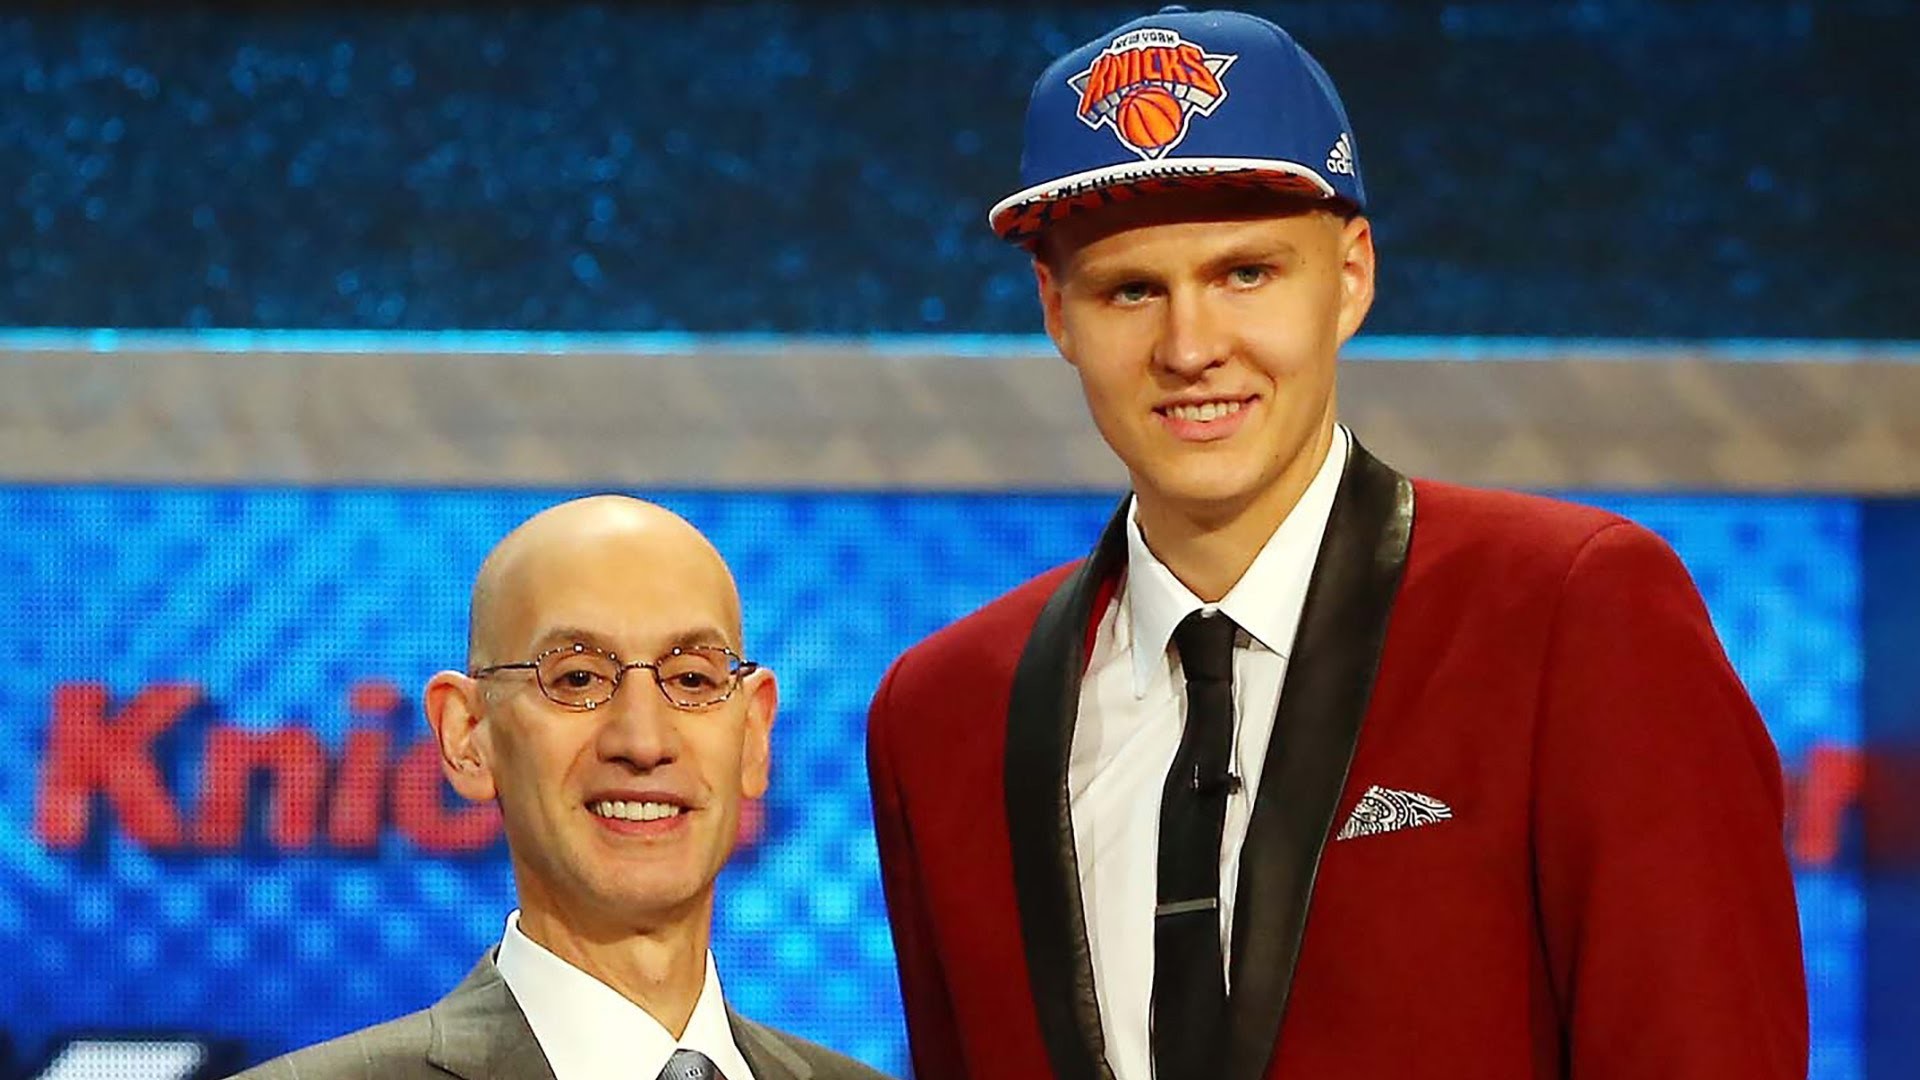 1920x1080 Knicks Fans Boo Loudly & Cry After Kristaps Porzingis Selection - YouTube